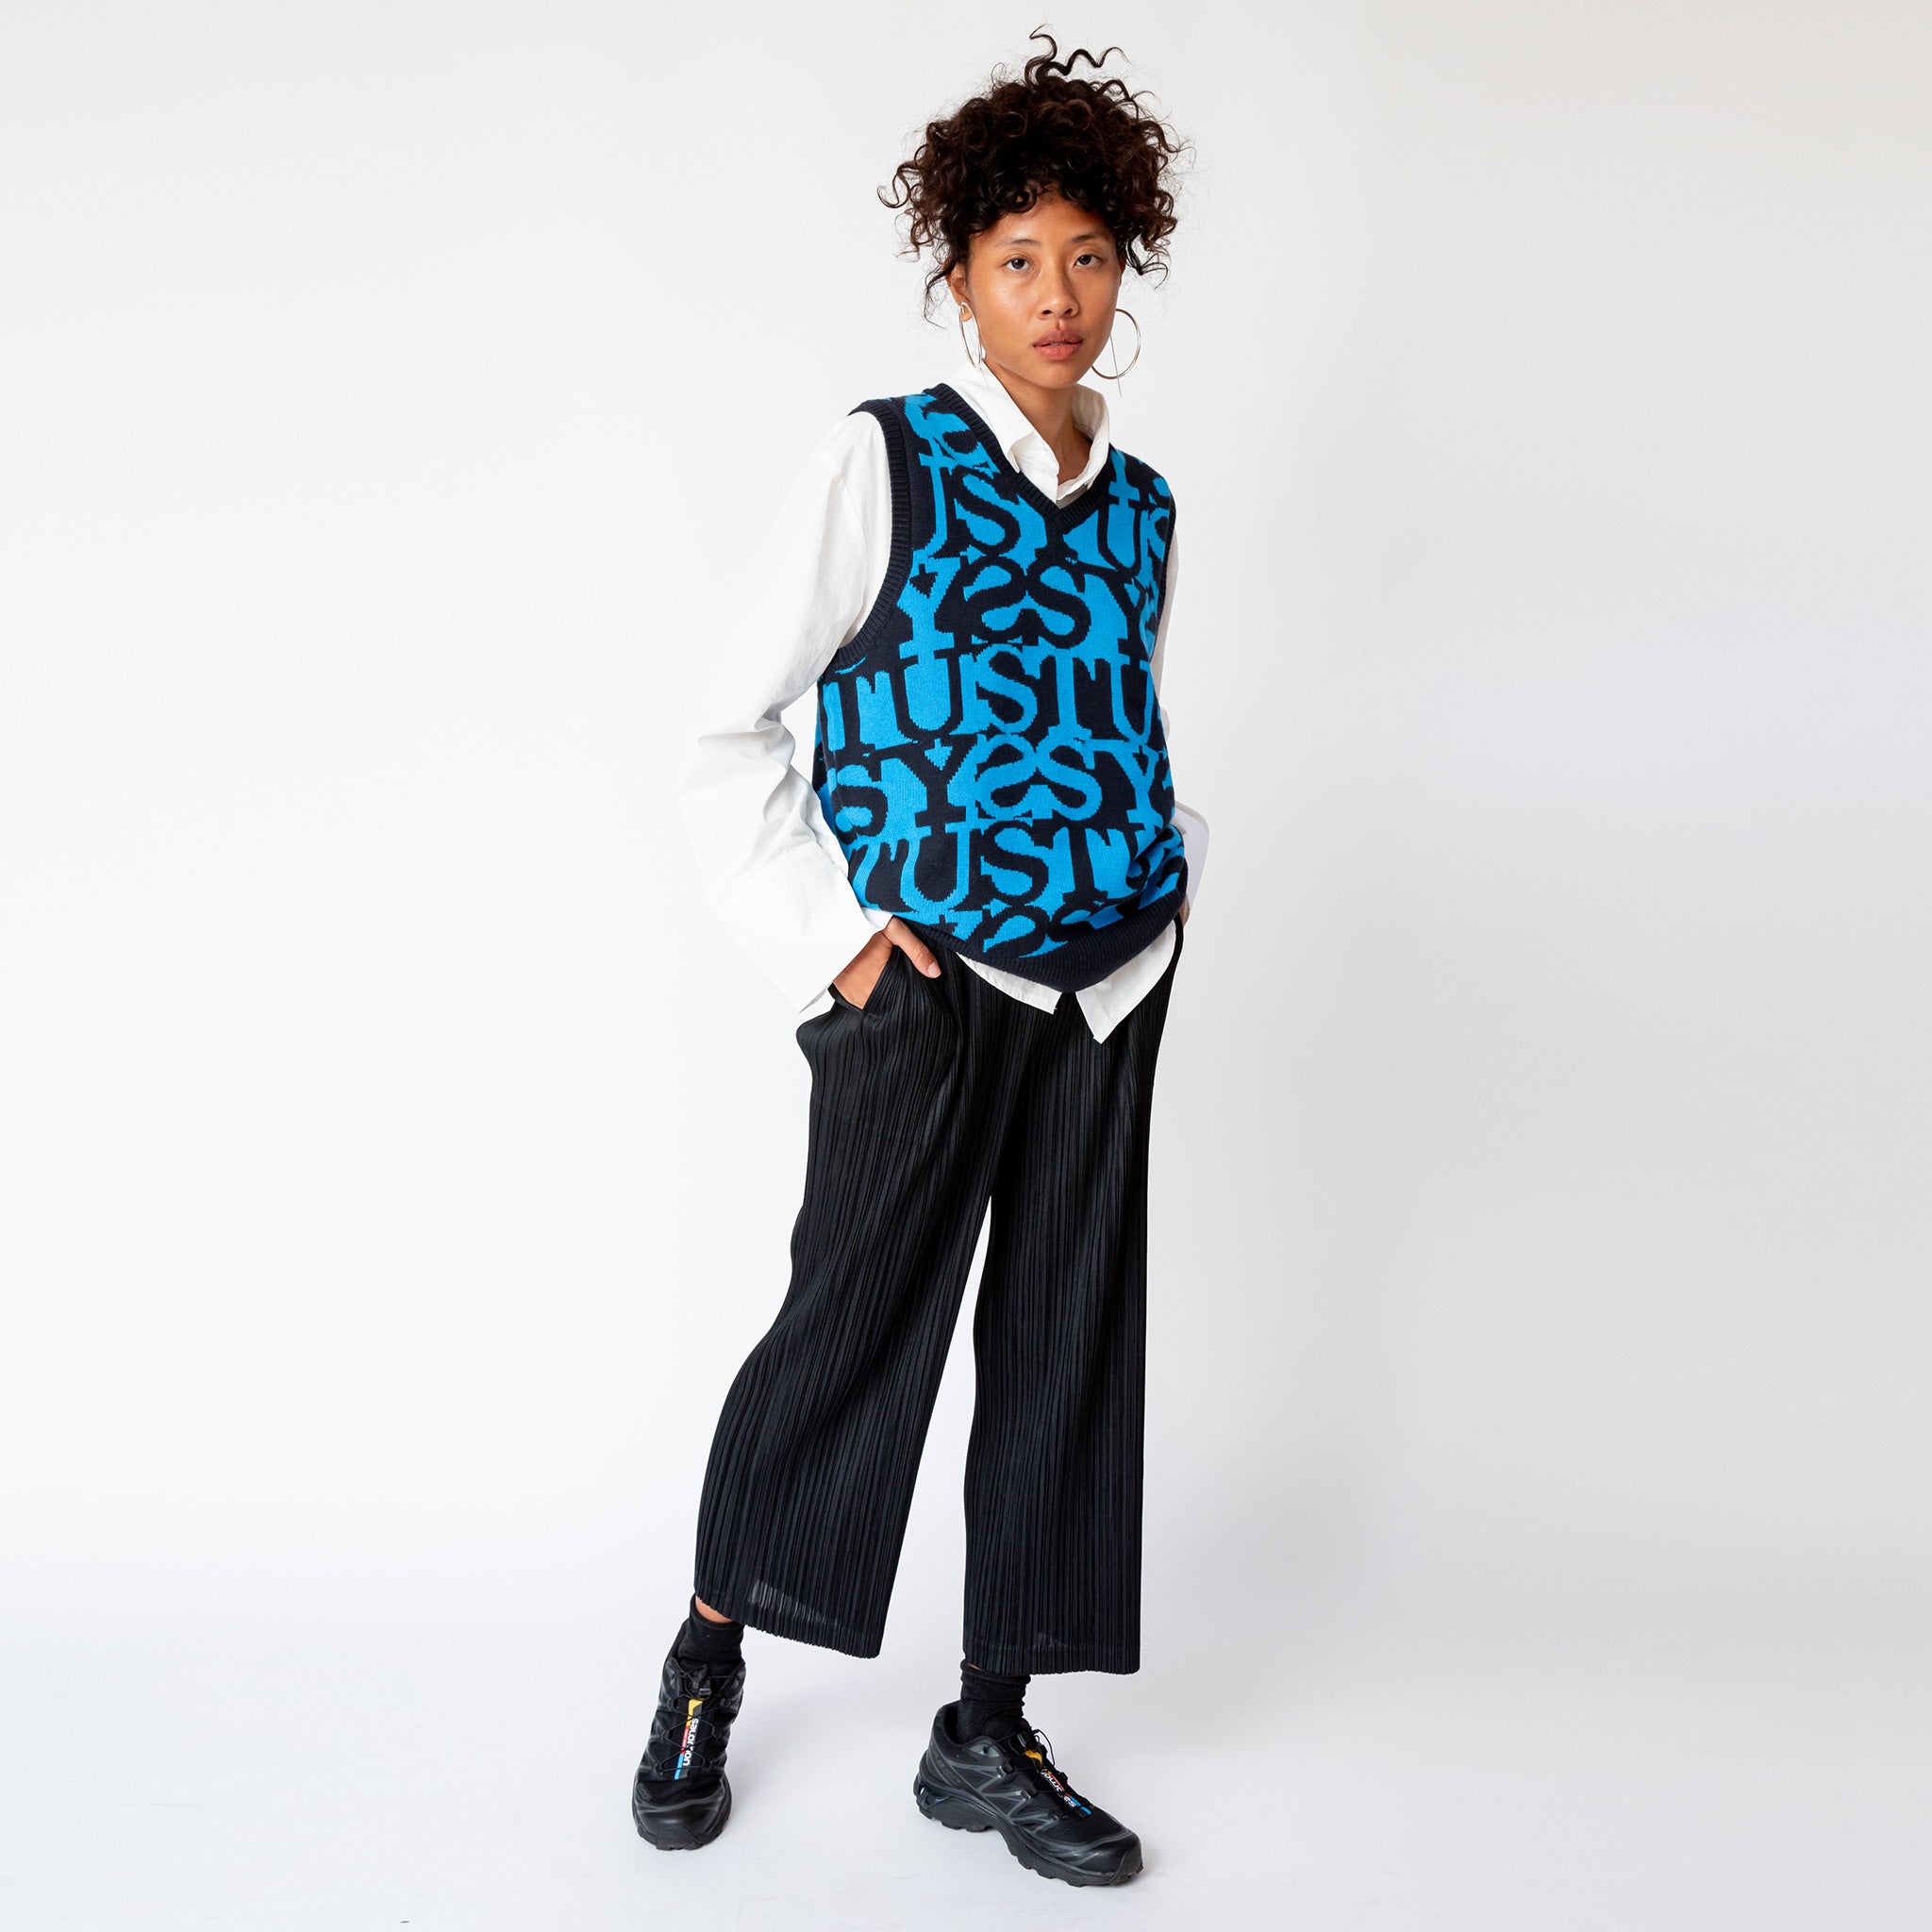 A full outfit view of a model wearing the black Thicker Bottoms 2 pleated trousers by Pleats Please, paired with a white shirt, blue and black graphic knit vest, and black sneakers.